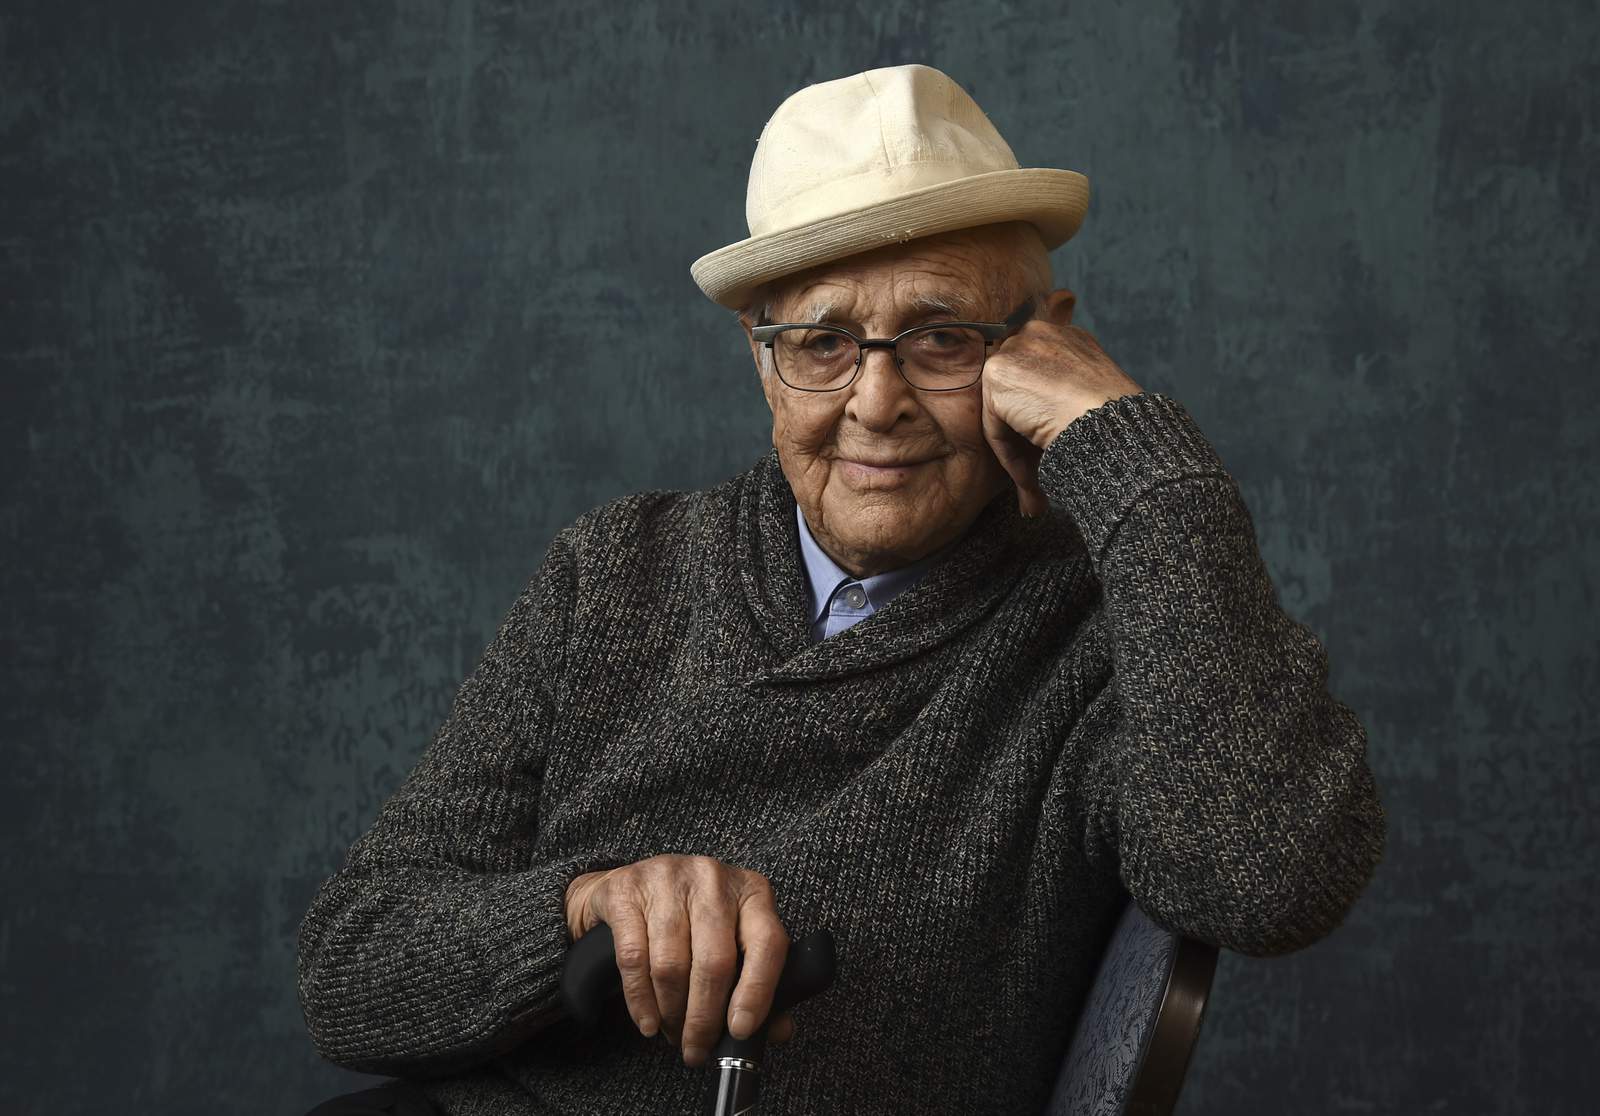 Golden Globes to honor legendary TV producer Norman Lear